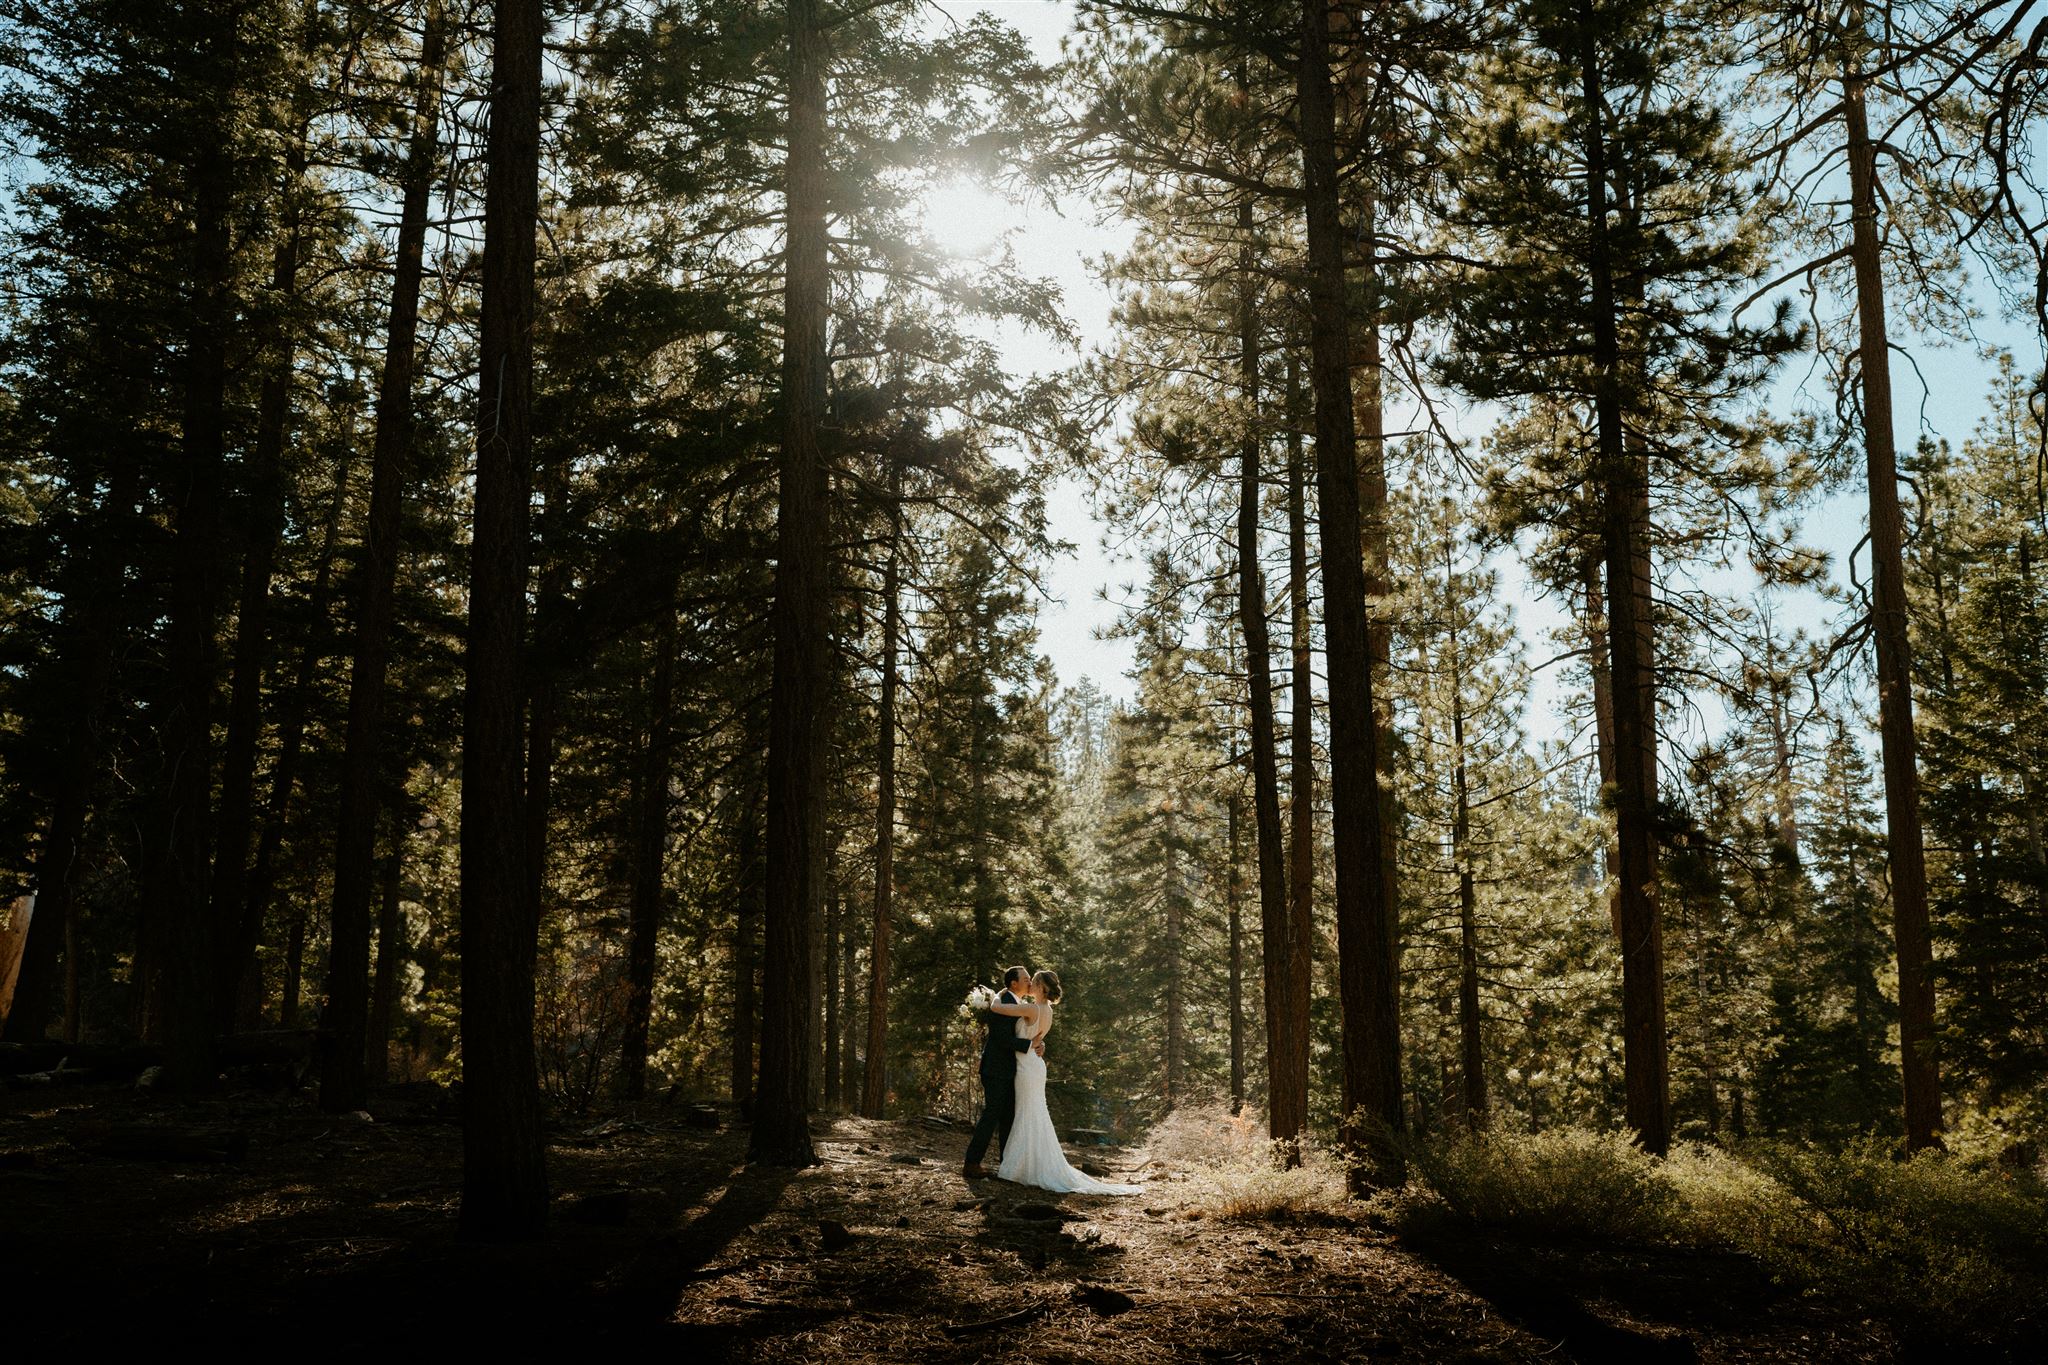 A bride and groom on their elopement day at Big Bear California in a forest of large pine trees